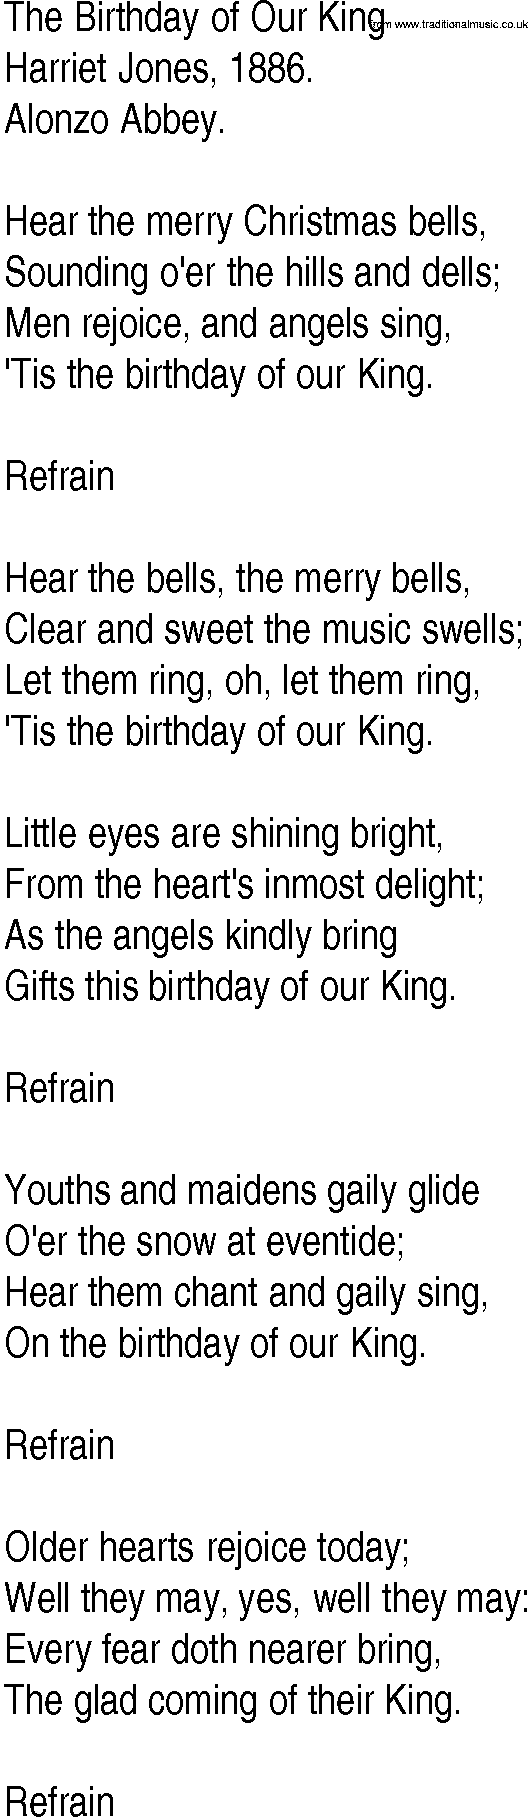 Hymn and Gospel Song: The Birthday of Our King by Harriet Jones lyrics